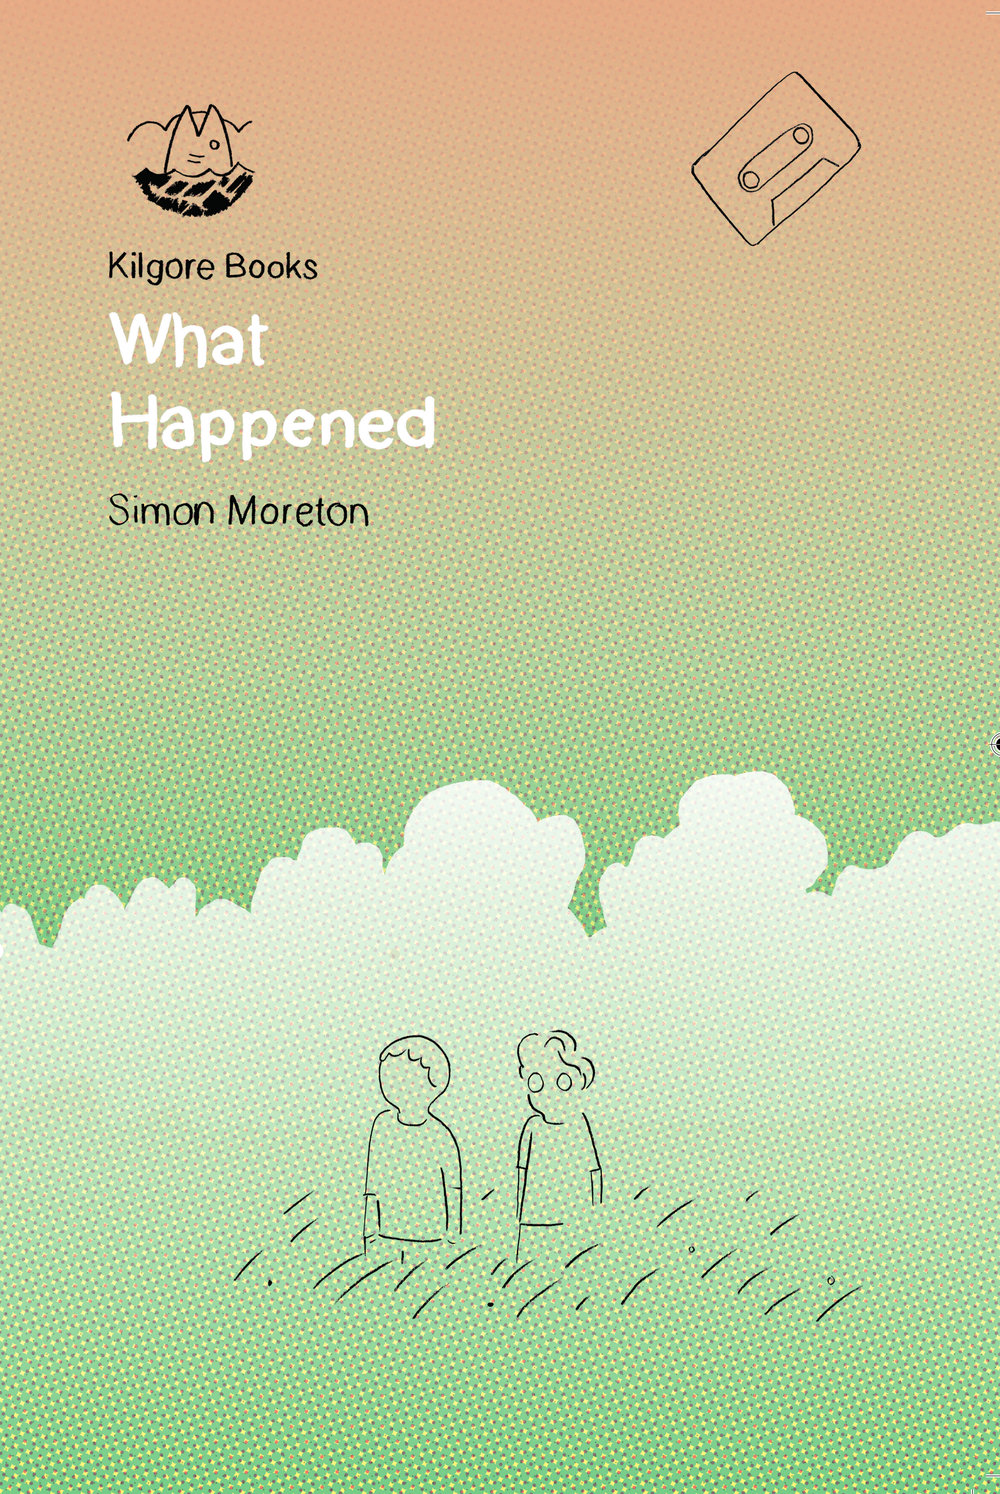 Review: What Happened by Simon Moreton